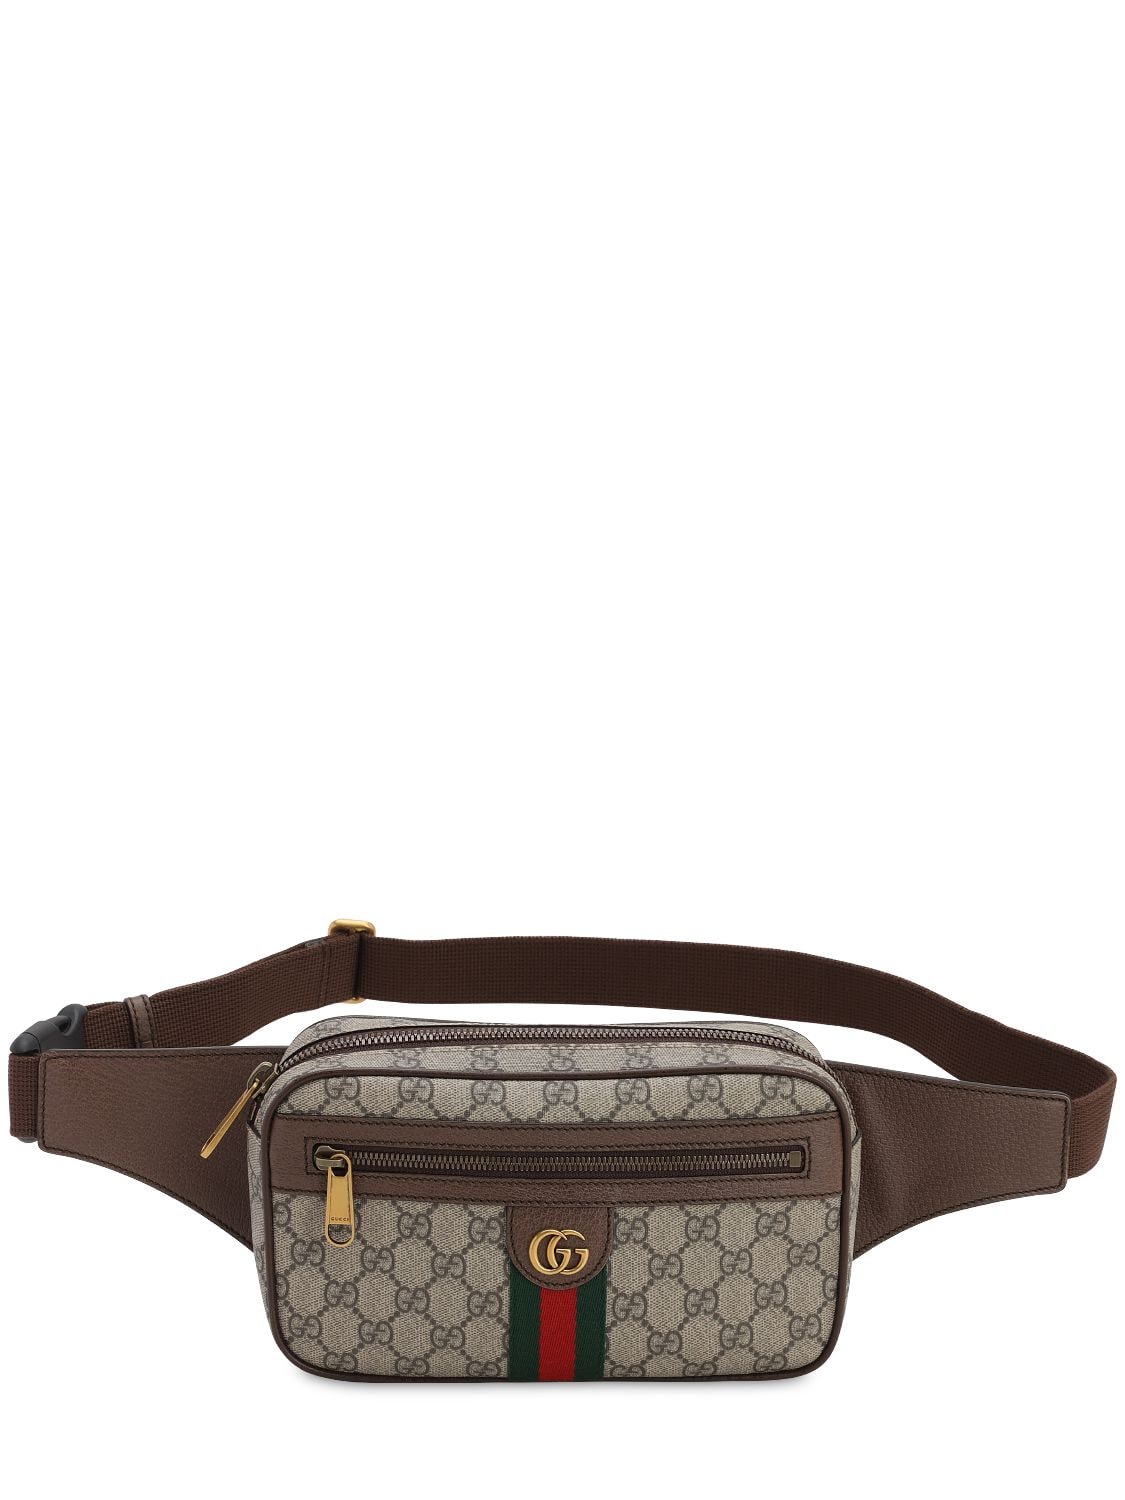 GUCCI "OPHIDIA"GG SUPREME腰包,71IGZF025-ODC0NW2